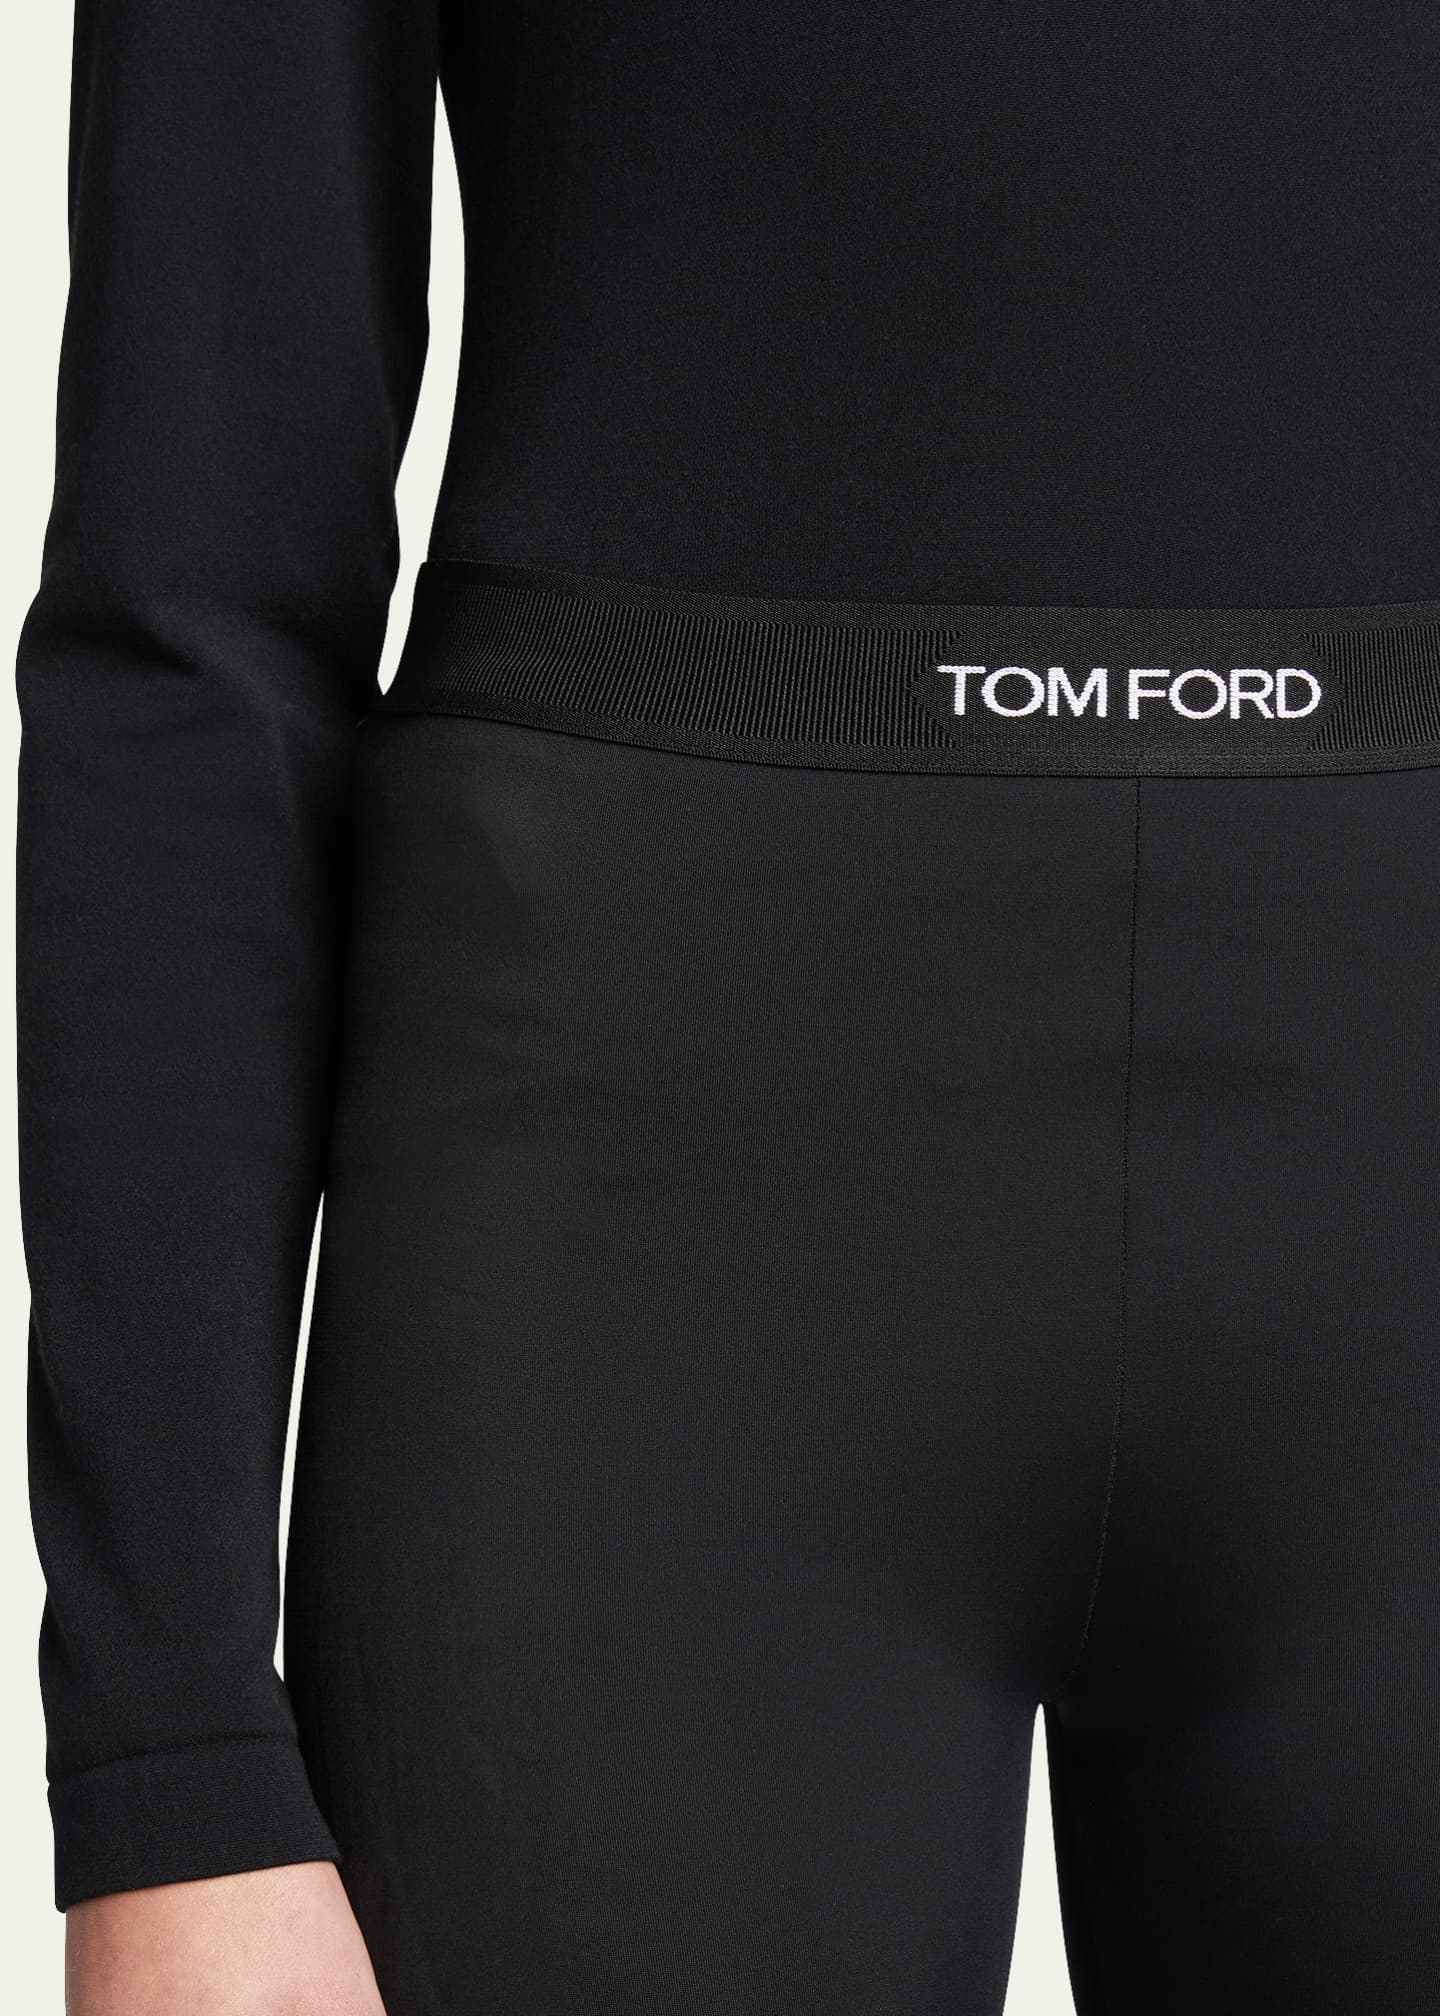 tom ford Leggings with logo band available on  -  36034 - AE